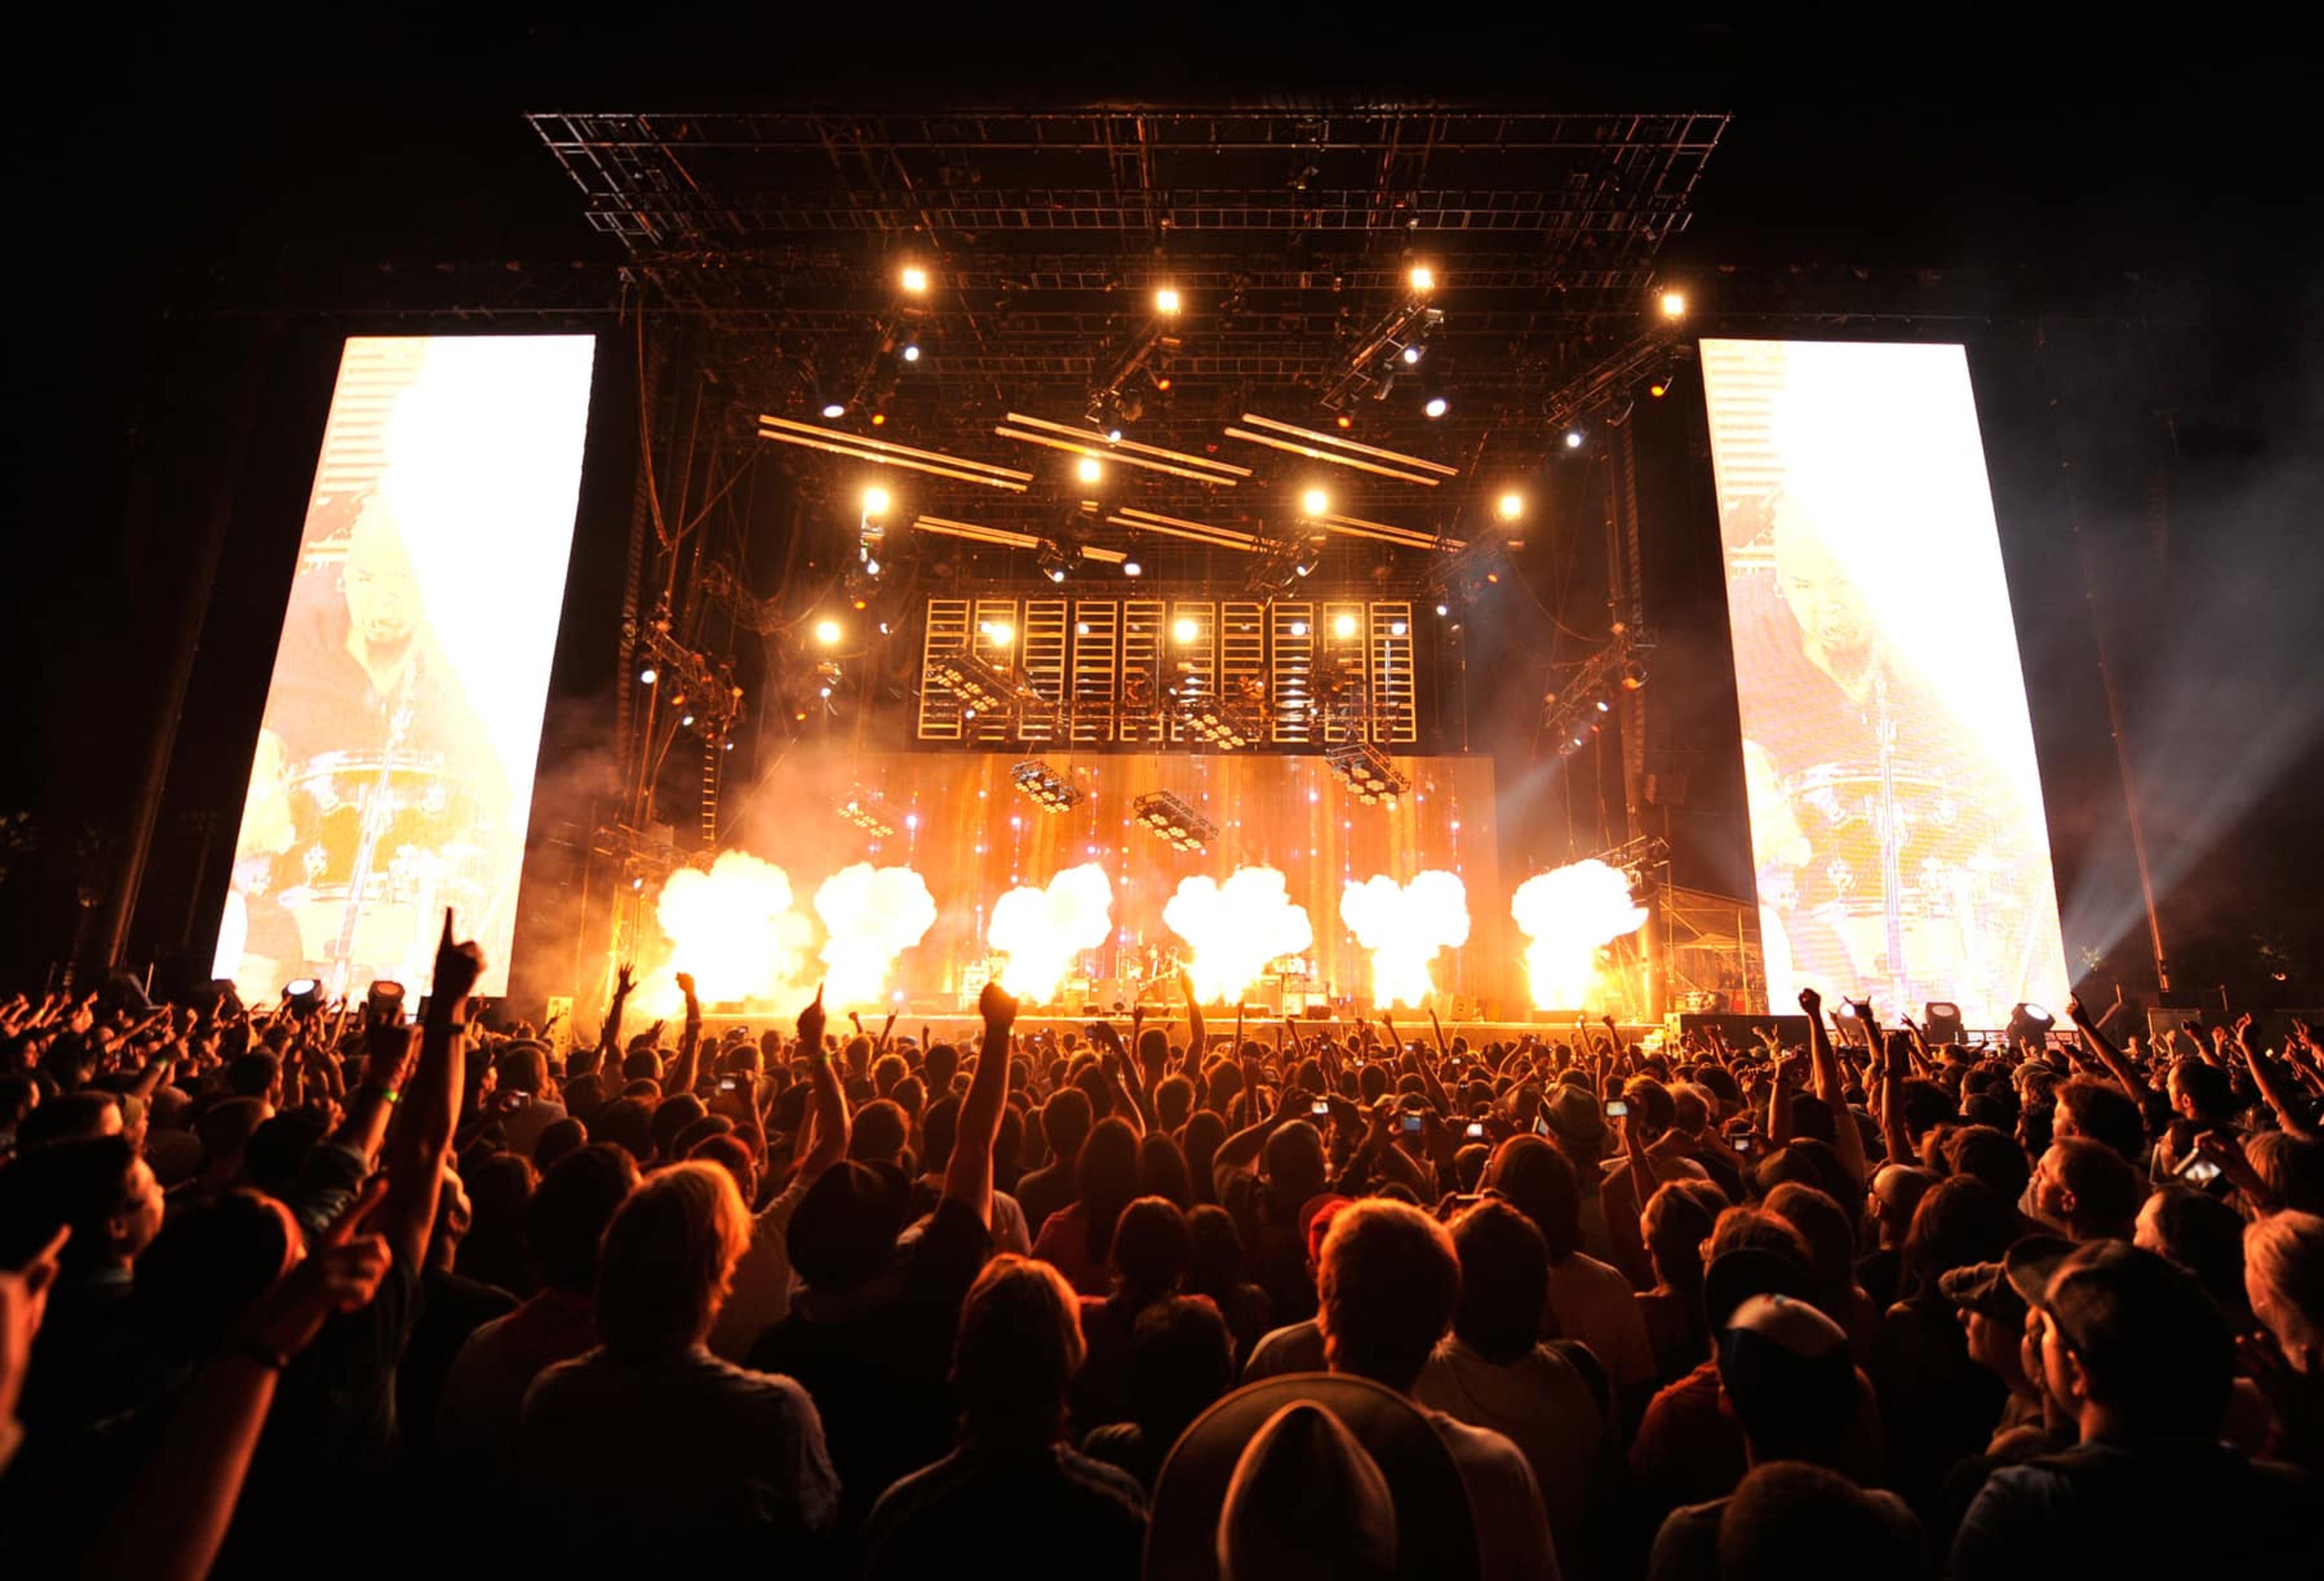 A crowd of people watching pyrotechnics on stage